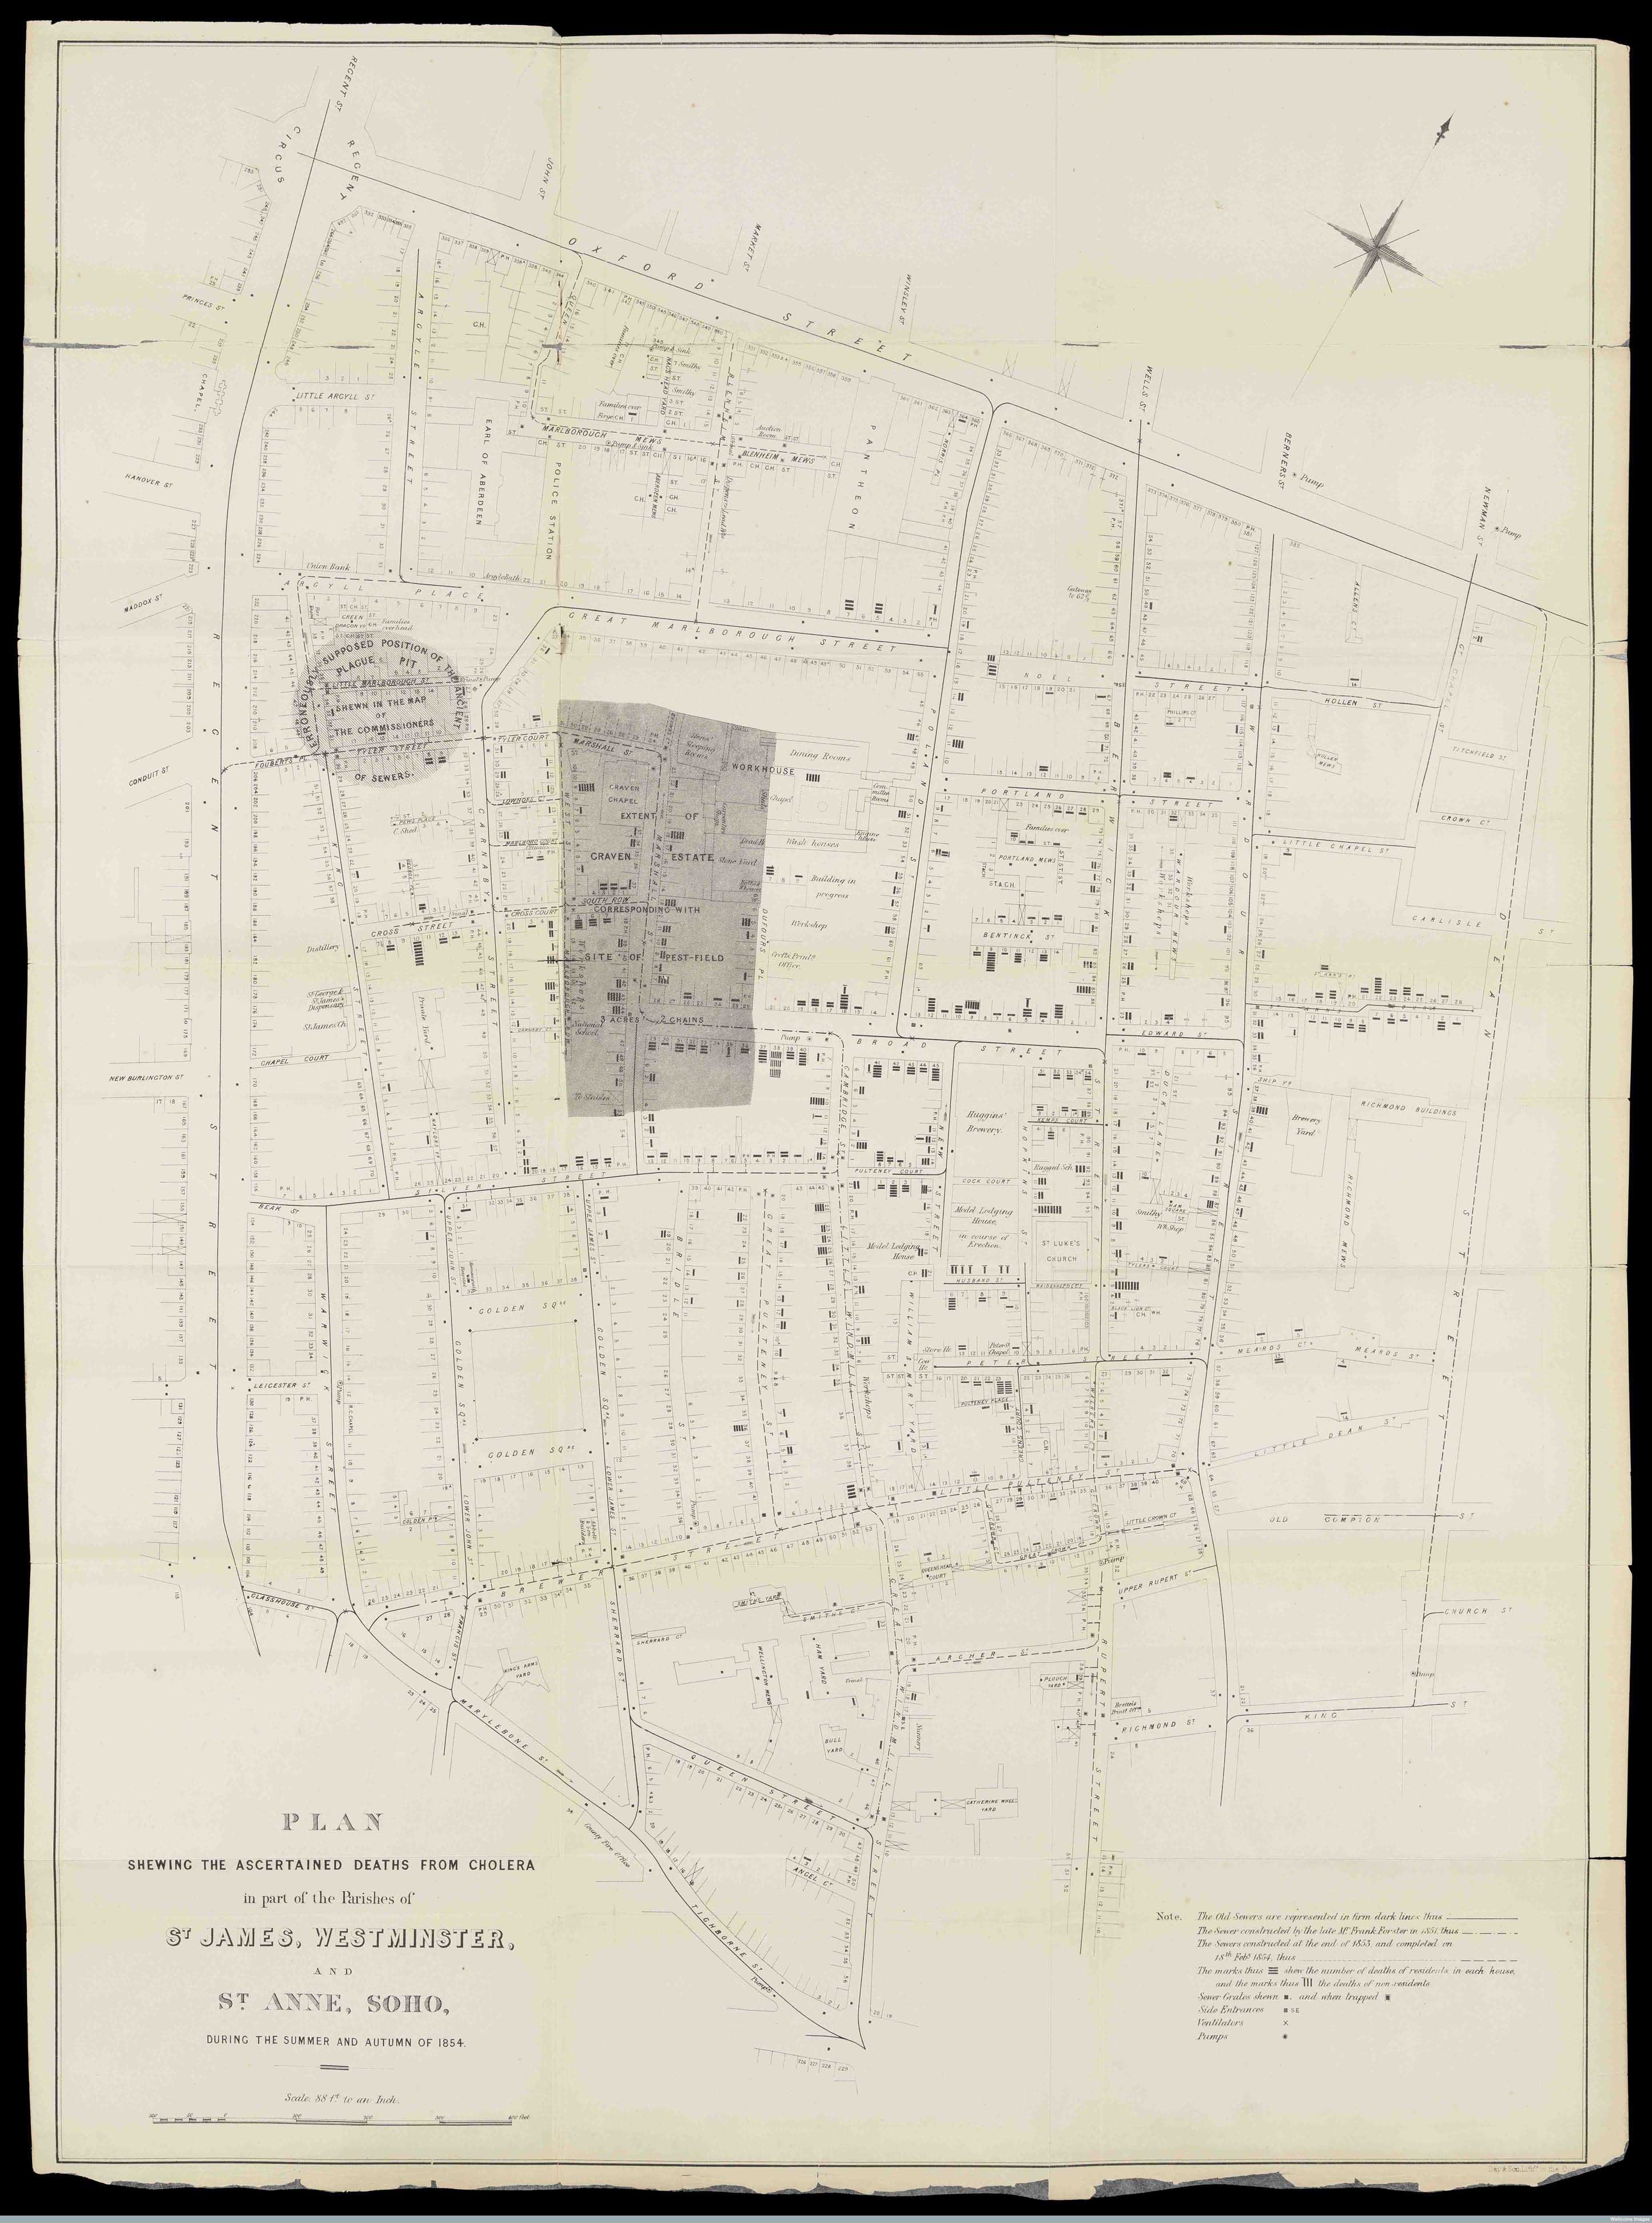 L0072142 Plan Showing the Ascertained Deaths from Cholera